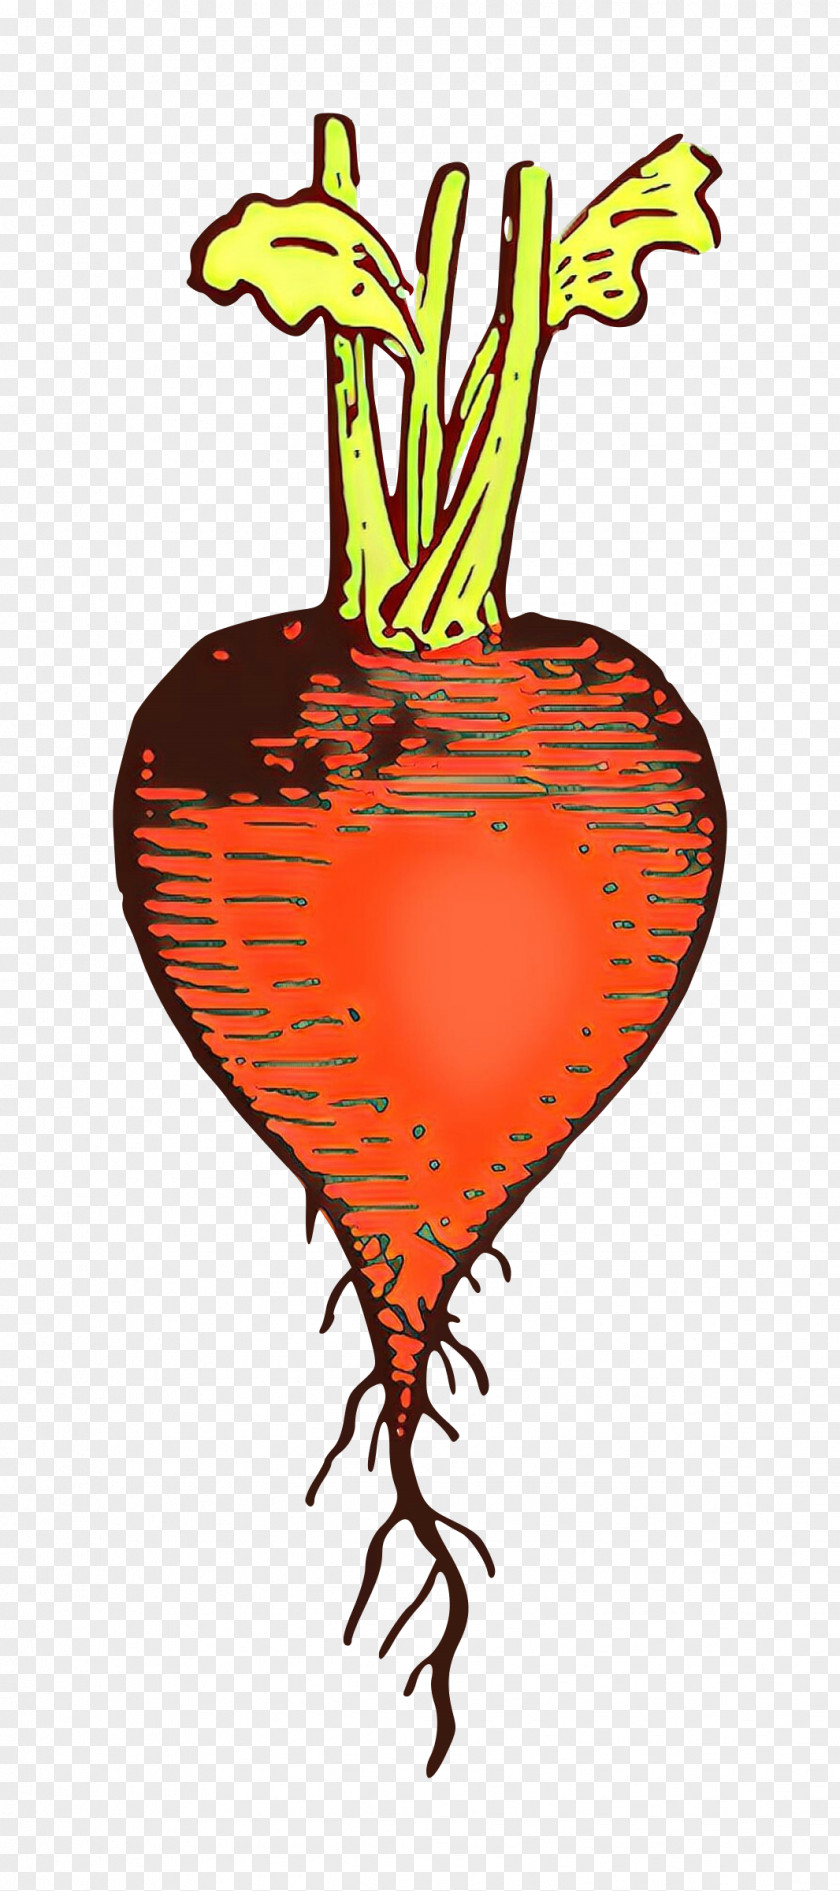 Plant Heart Carrot Beetroot Root Vegetable PNG